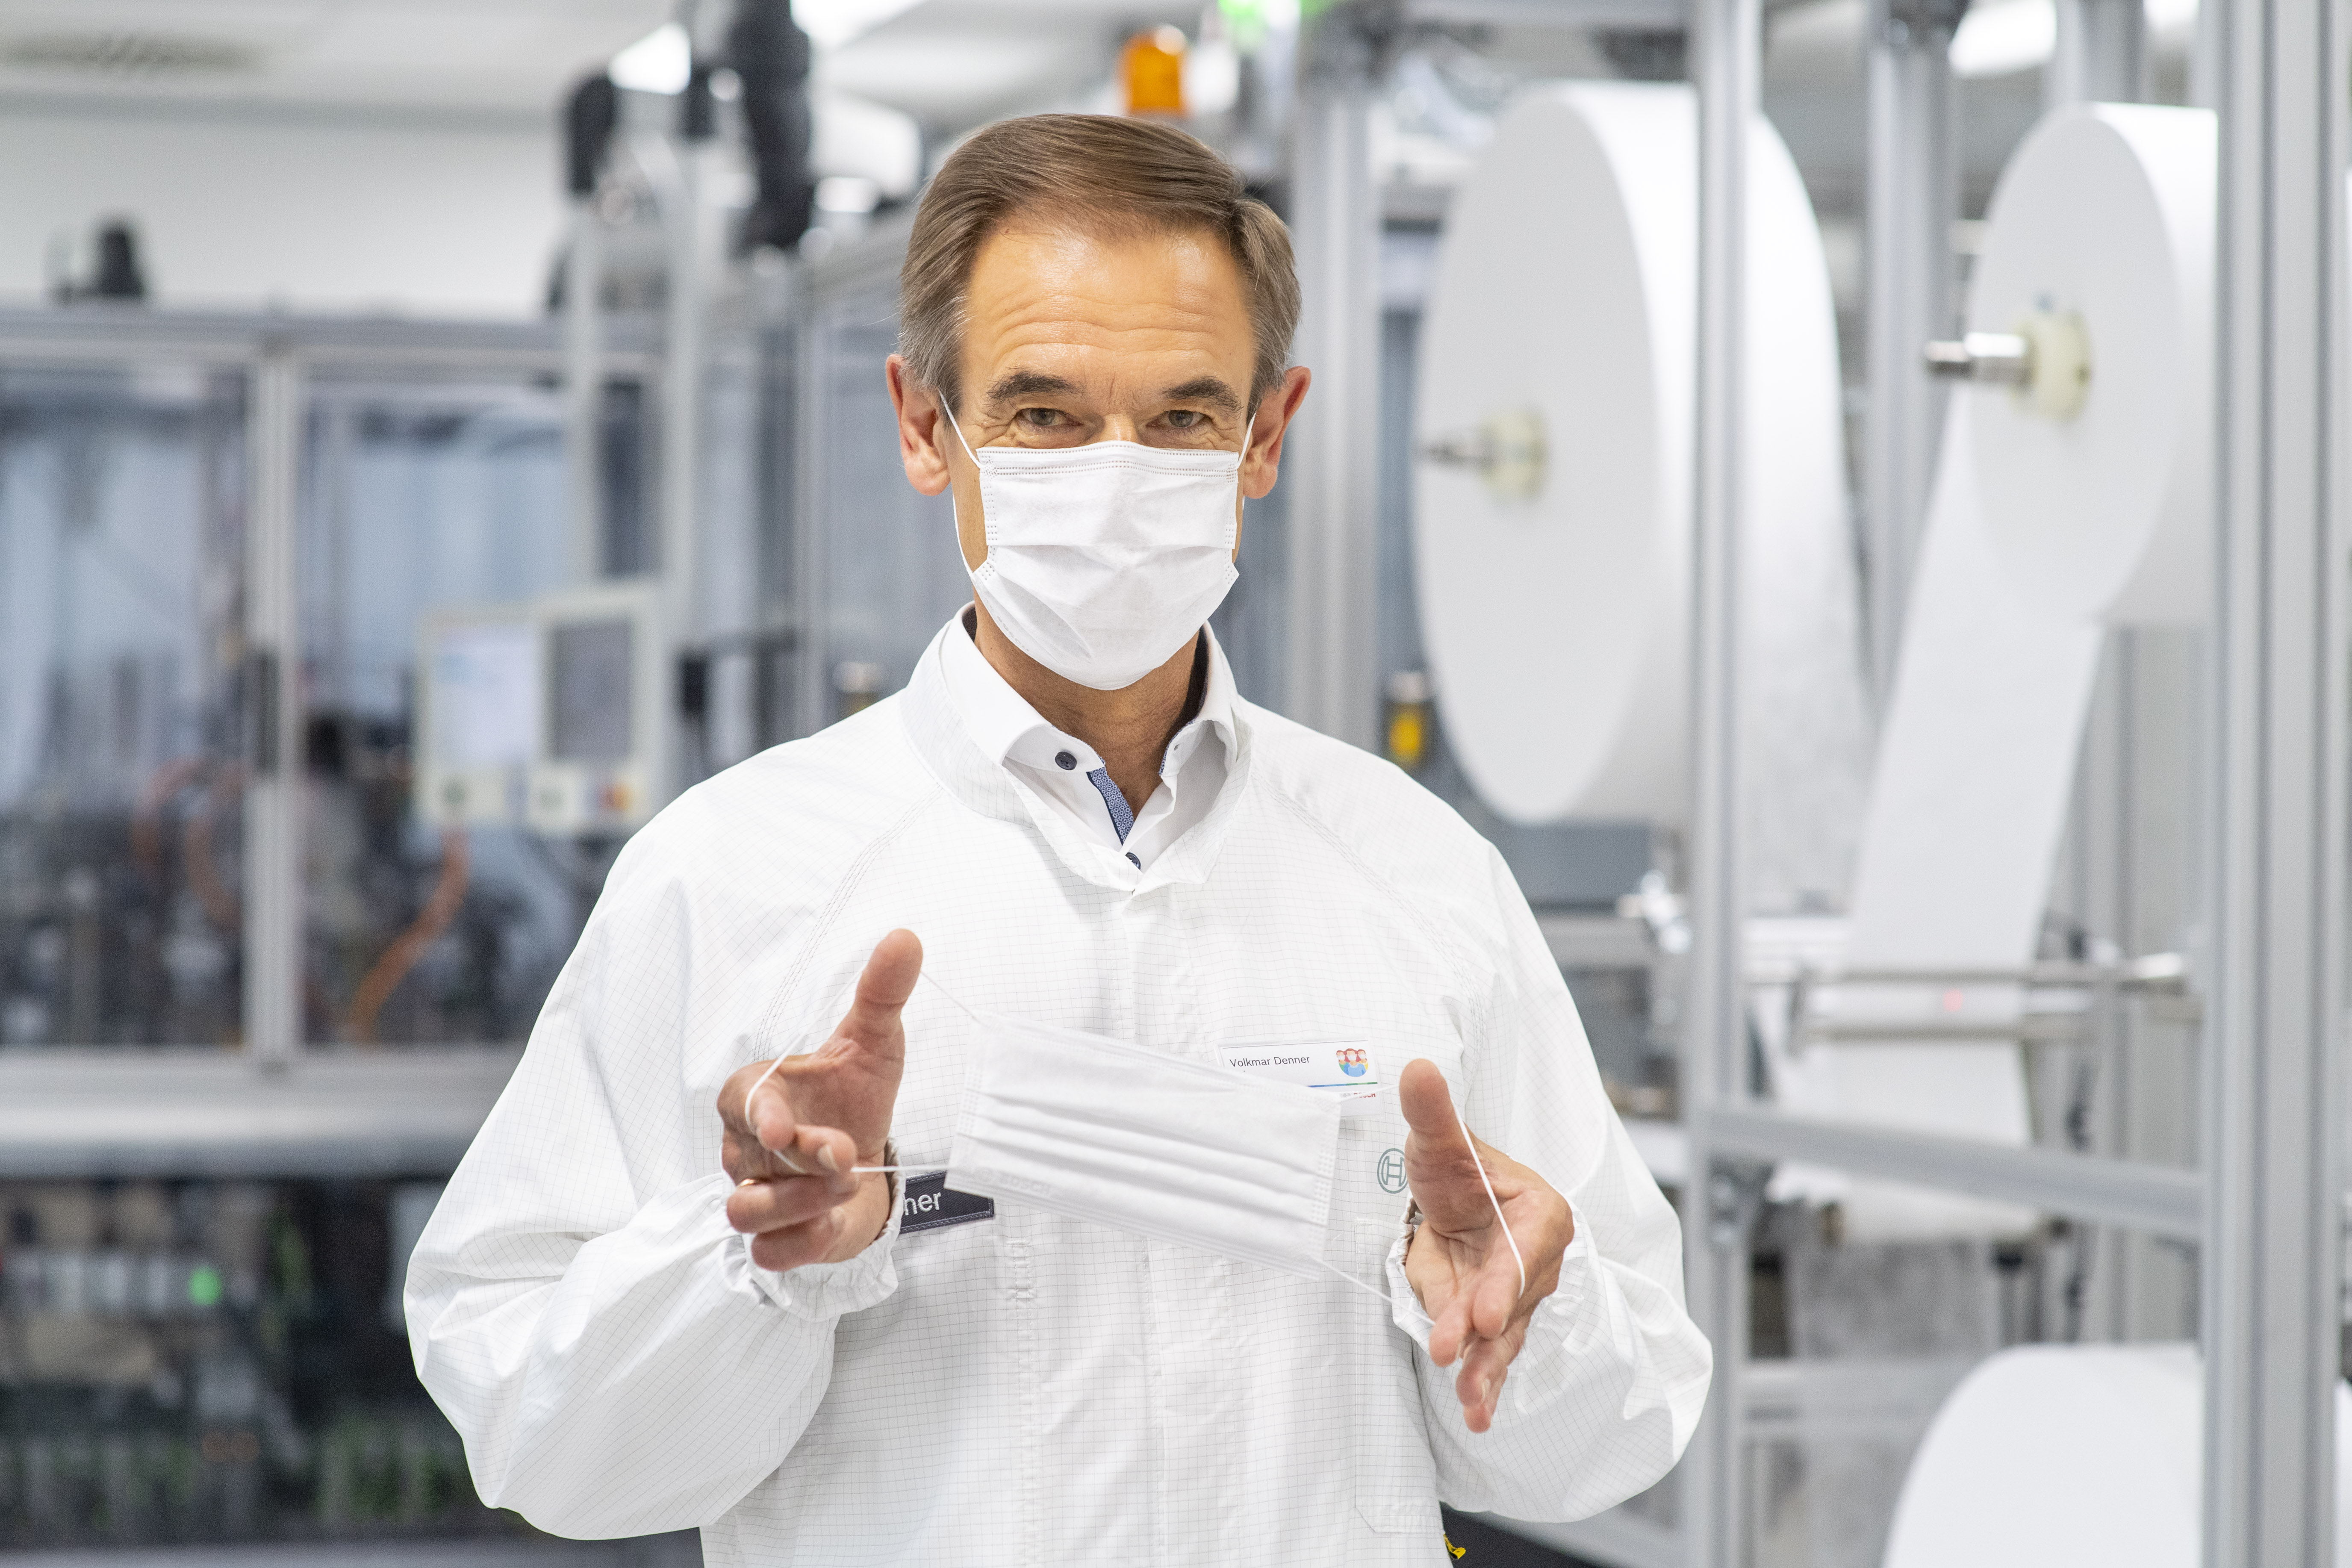 The Bosch CEO Dr. Volkmar Denner launches a special production line for face masks.